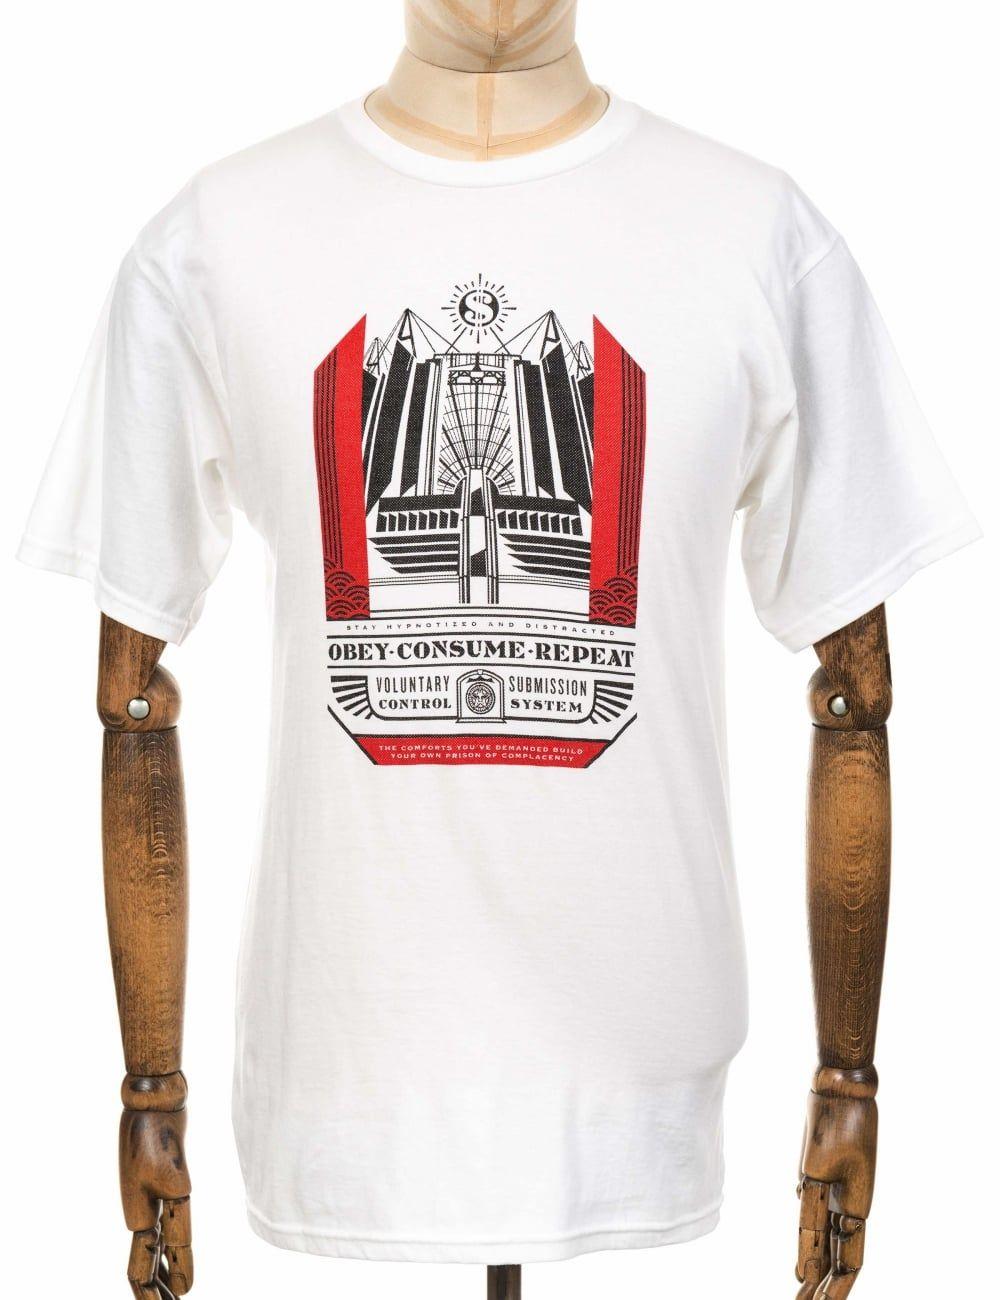 OBEY Clothing Logo - Obey Clothing Church Of Consumption Tee from Fat